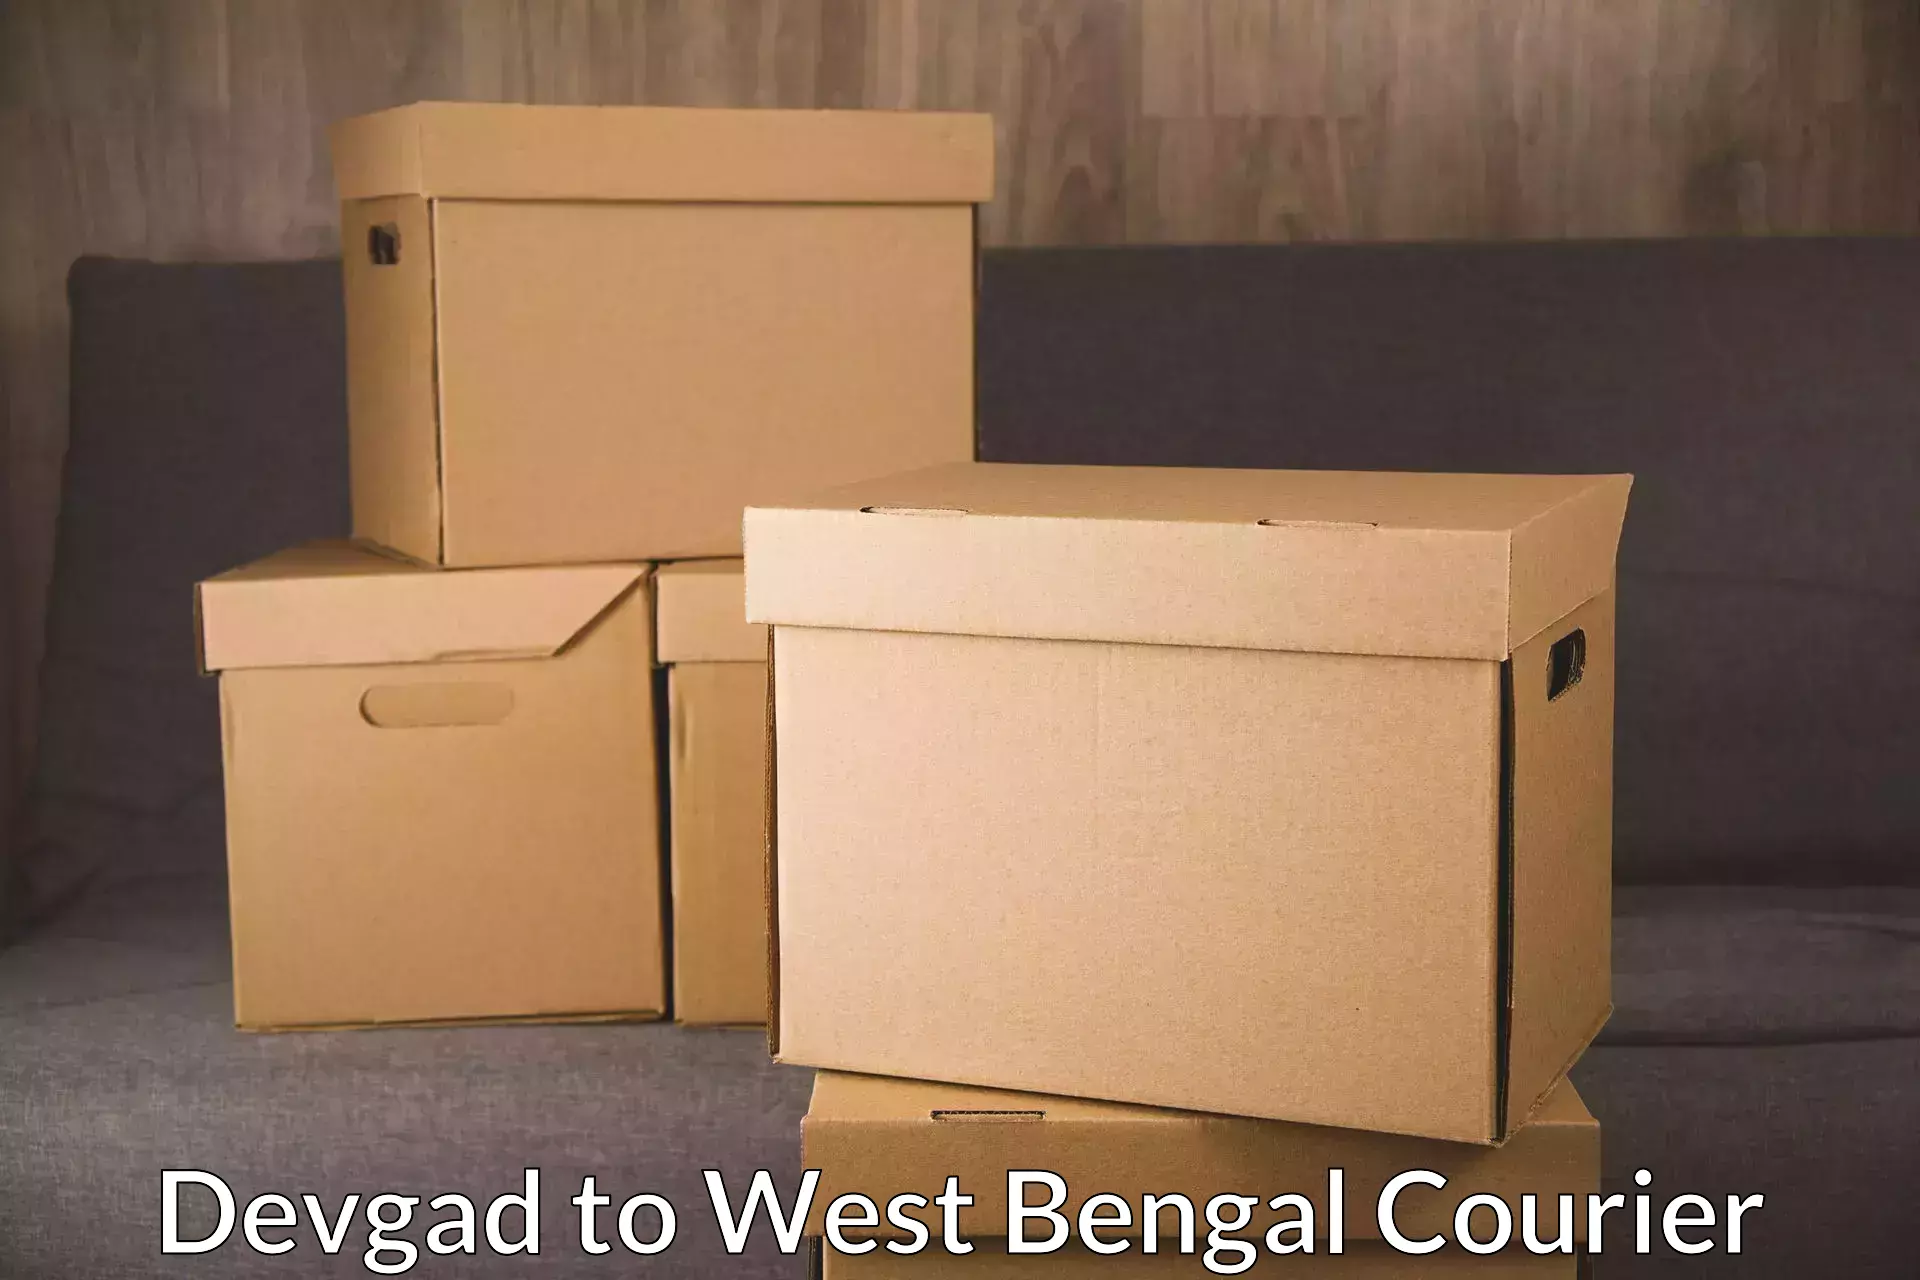 Global shipping solutions Devgad to Titagarh